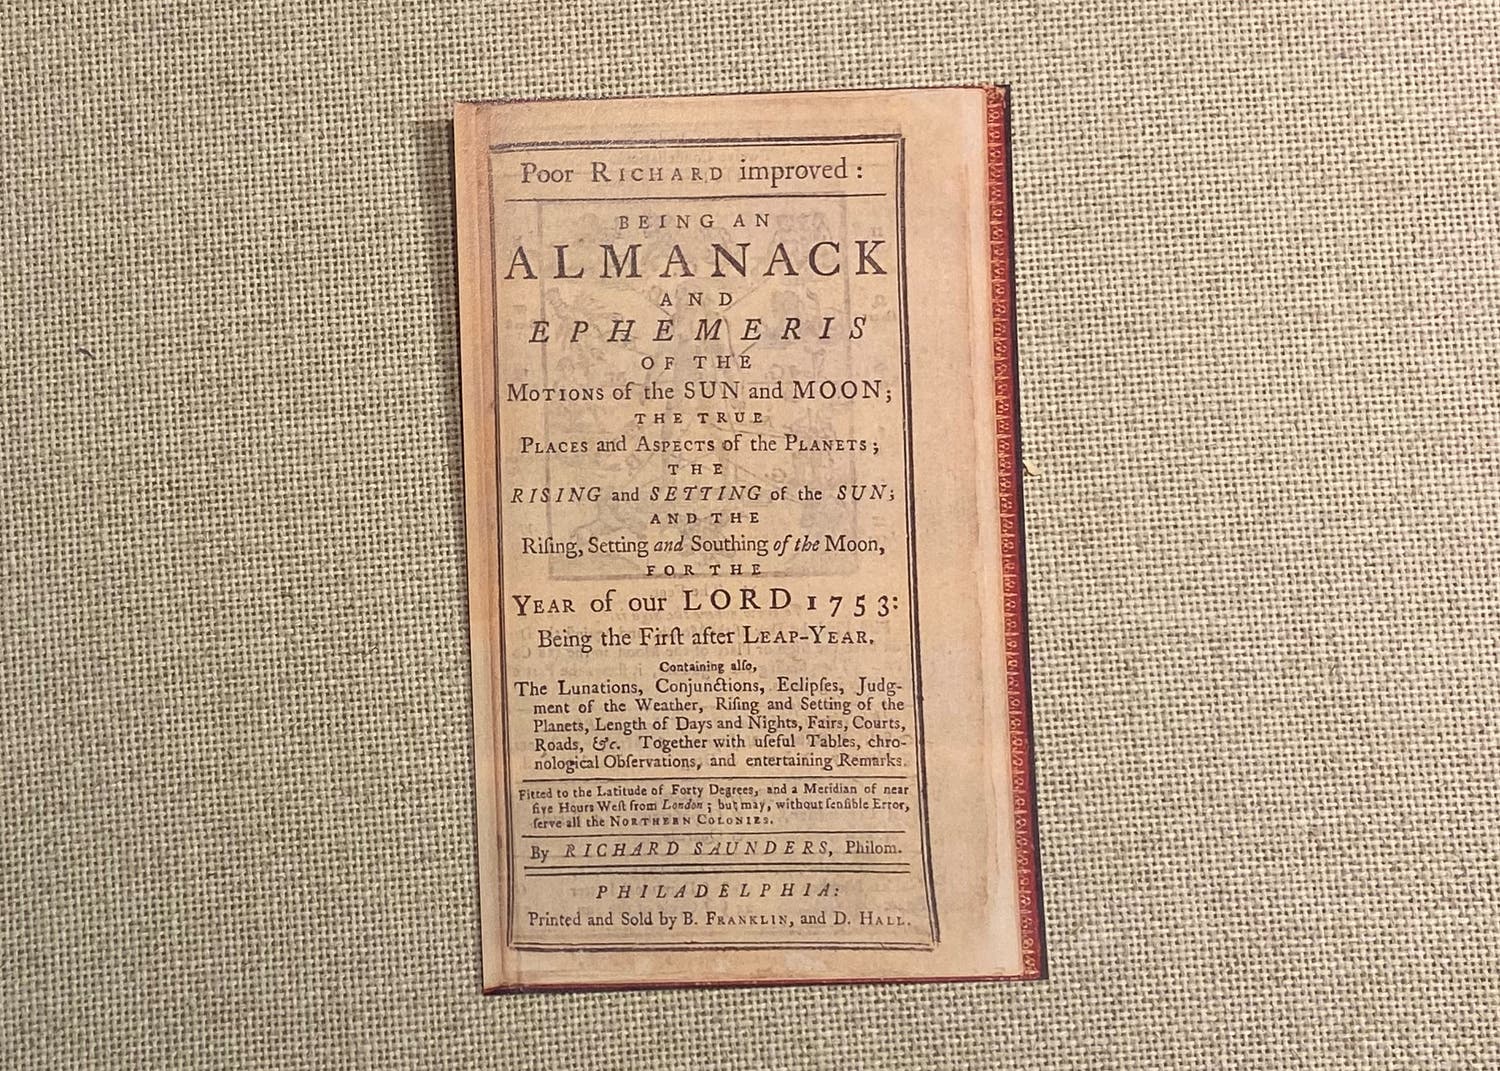 A reproduction of the front plate of Poor Richard's Almanack.